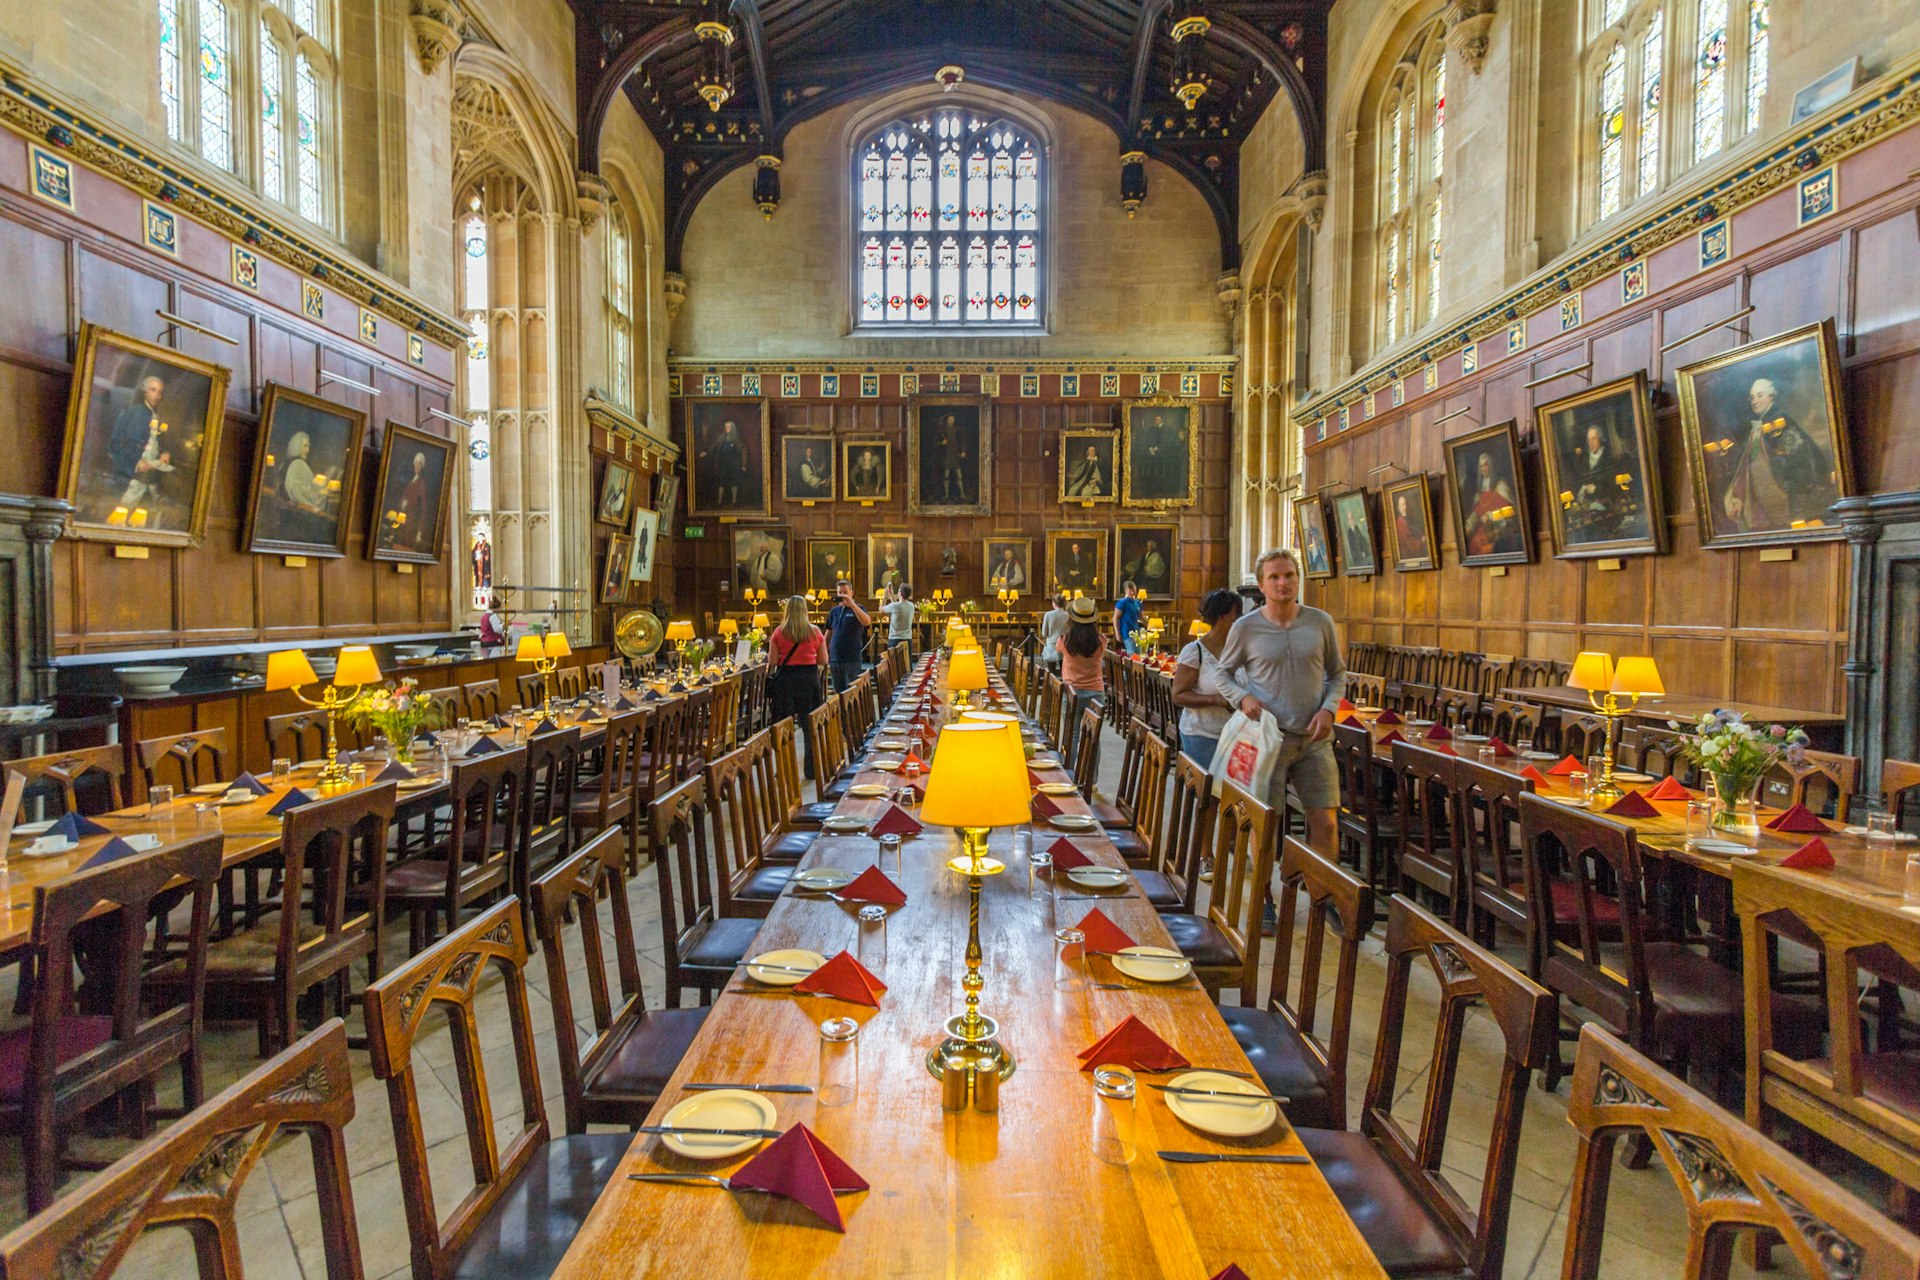 The great hall of Christ Church, University of Oxford, Oxford, England, United Kingdom